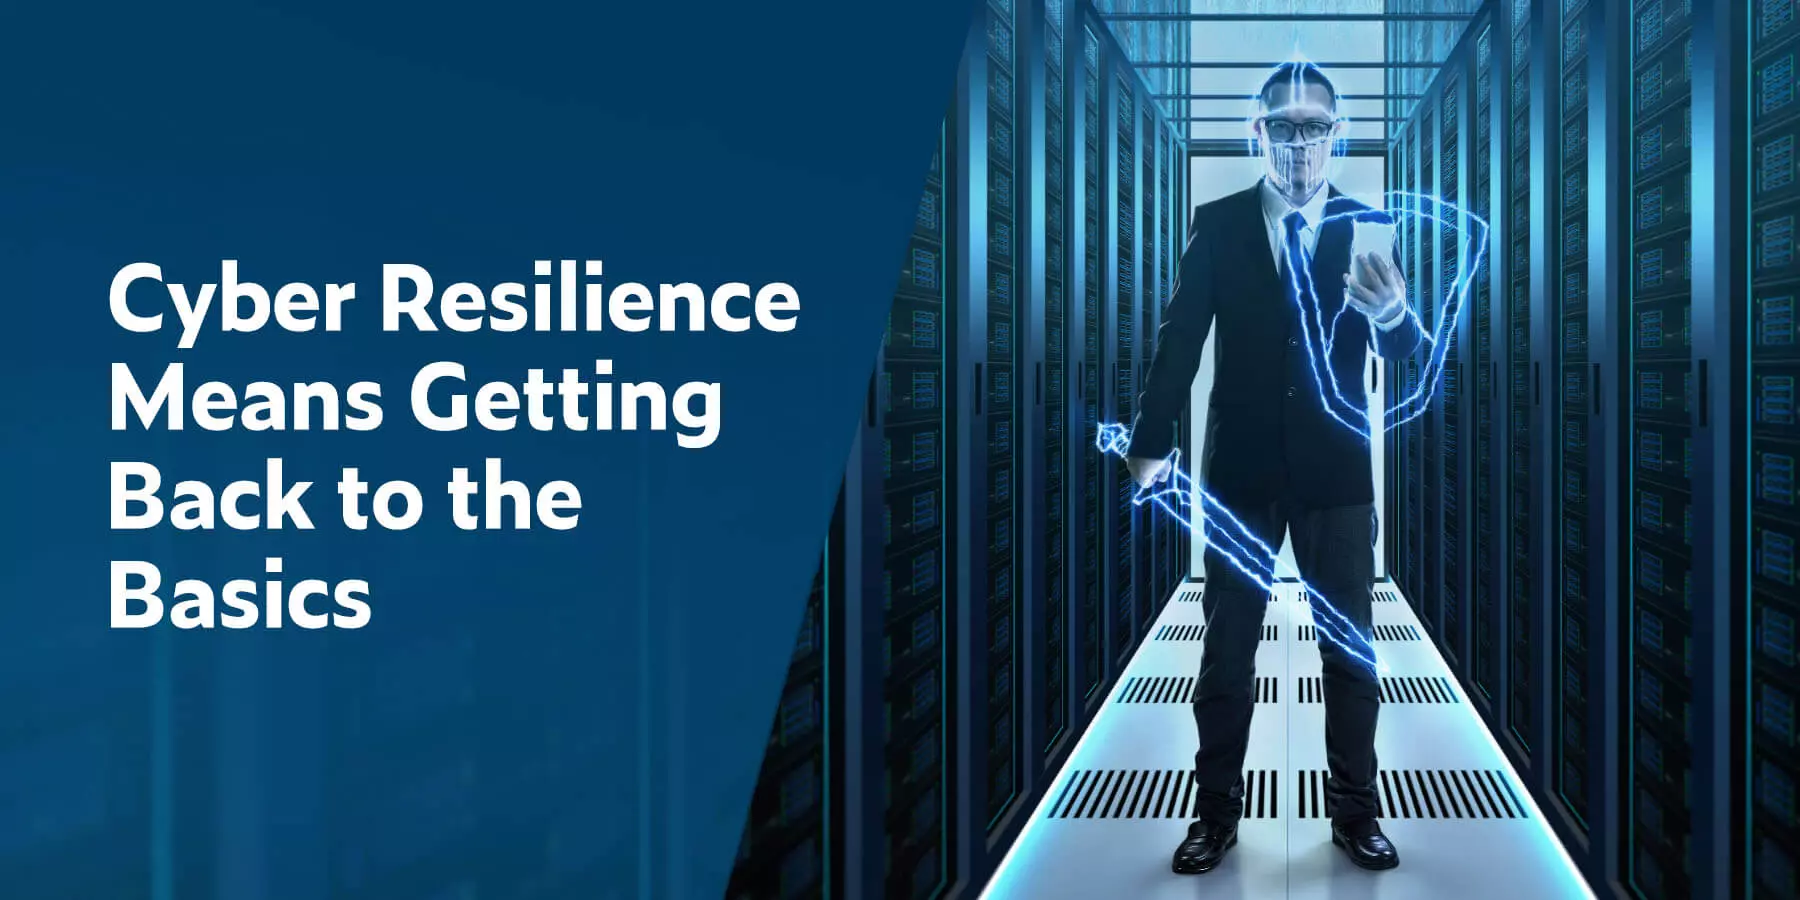 Cyber Resilience Means Getting Back to the Basics